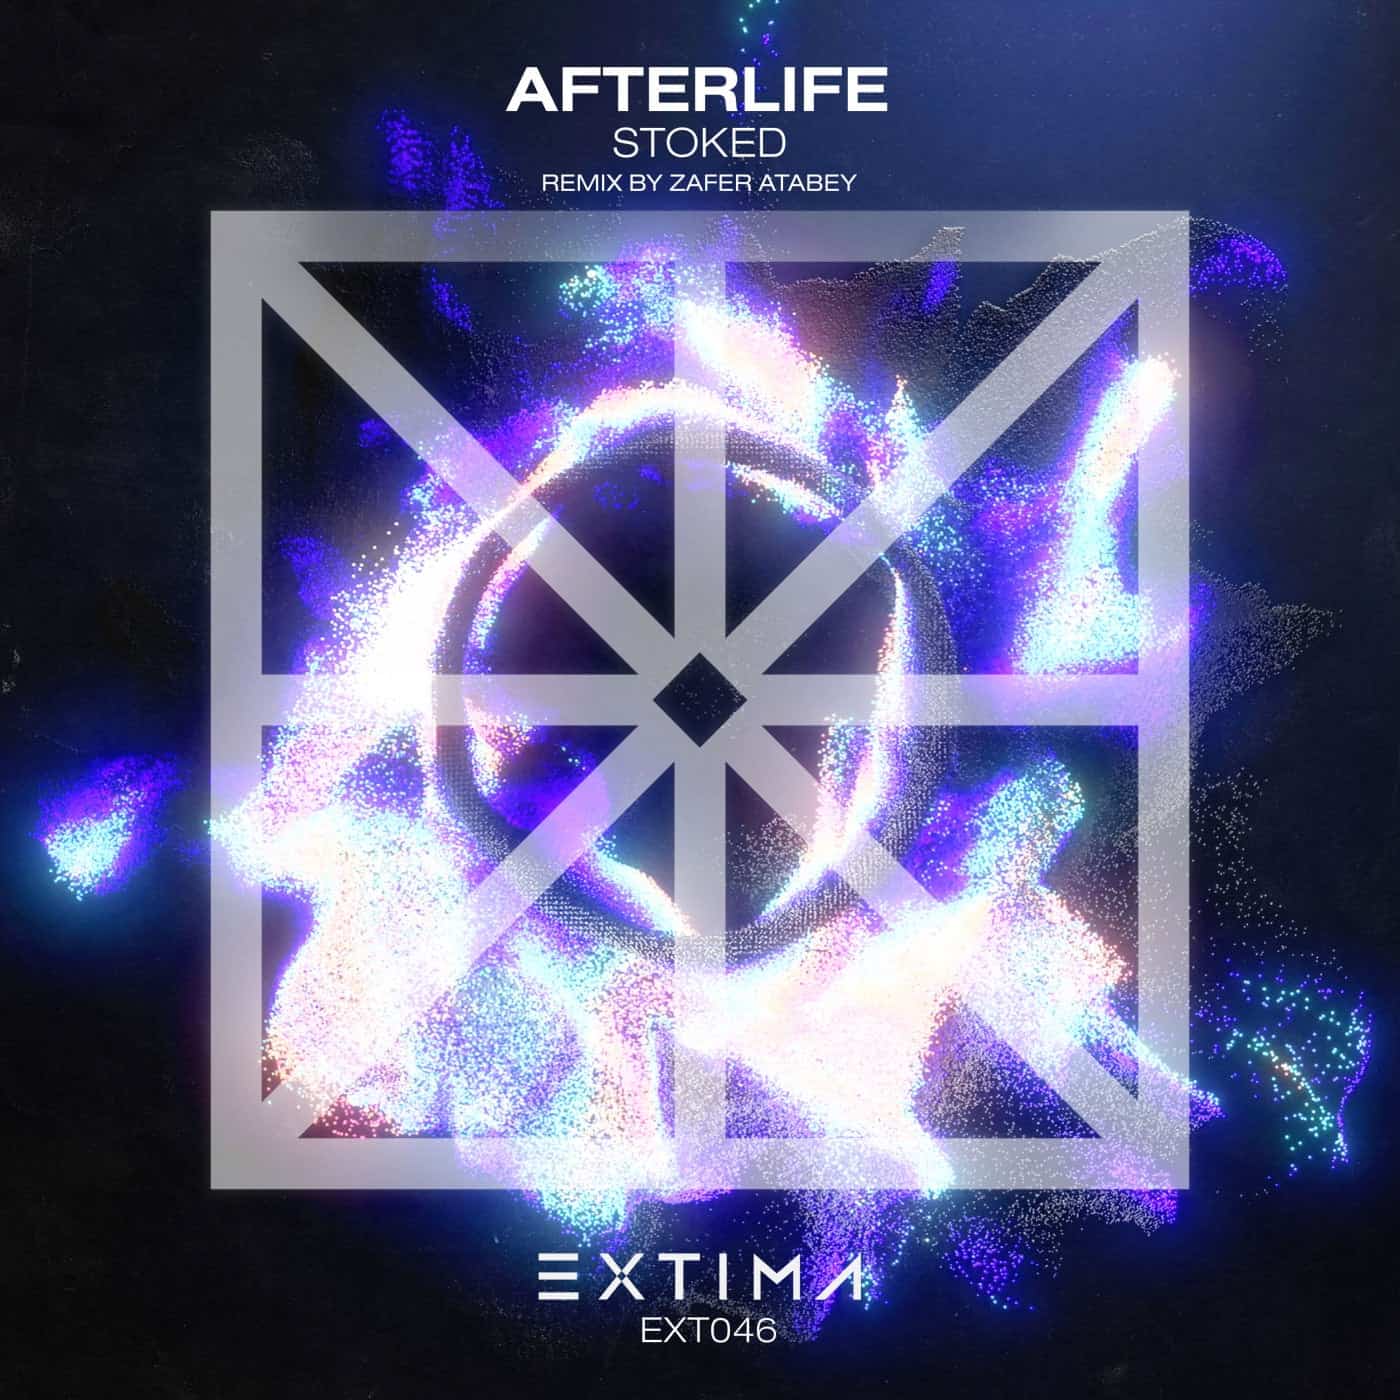 image cover: Stoked, Fire between us - Afterlife / EXT046